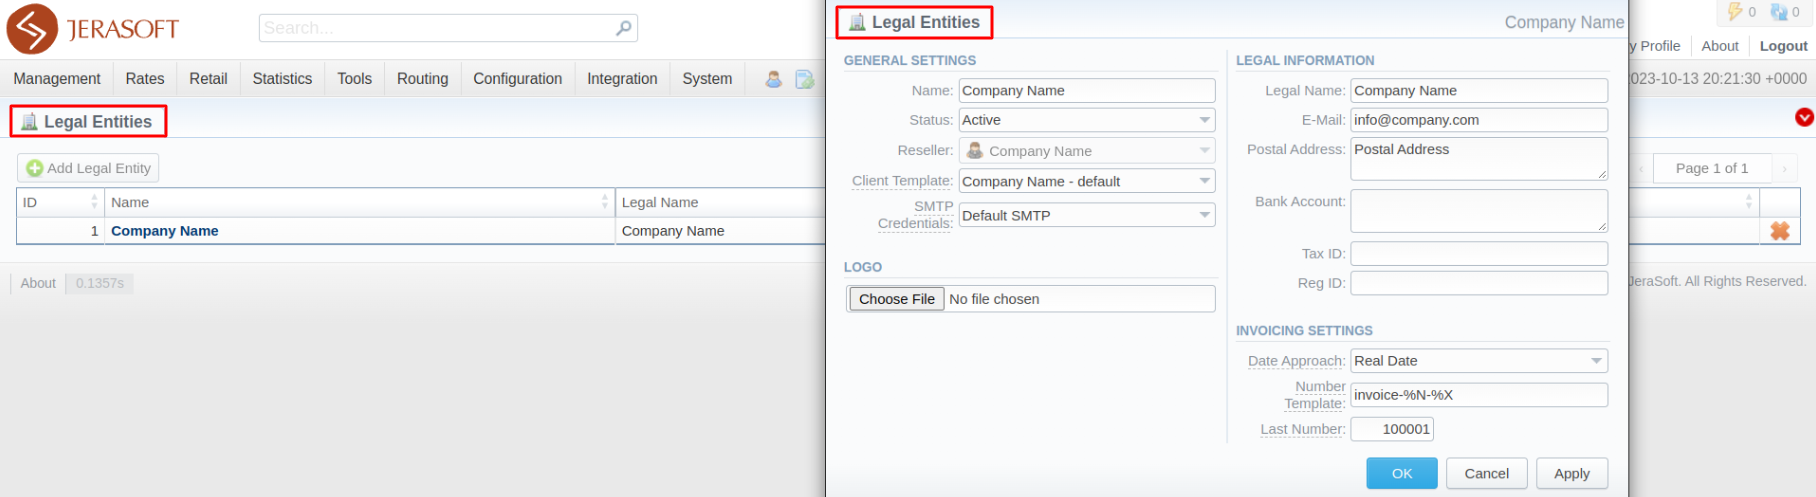 Legal Entities section